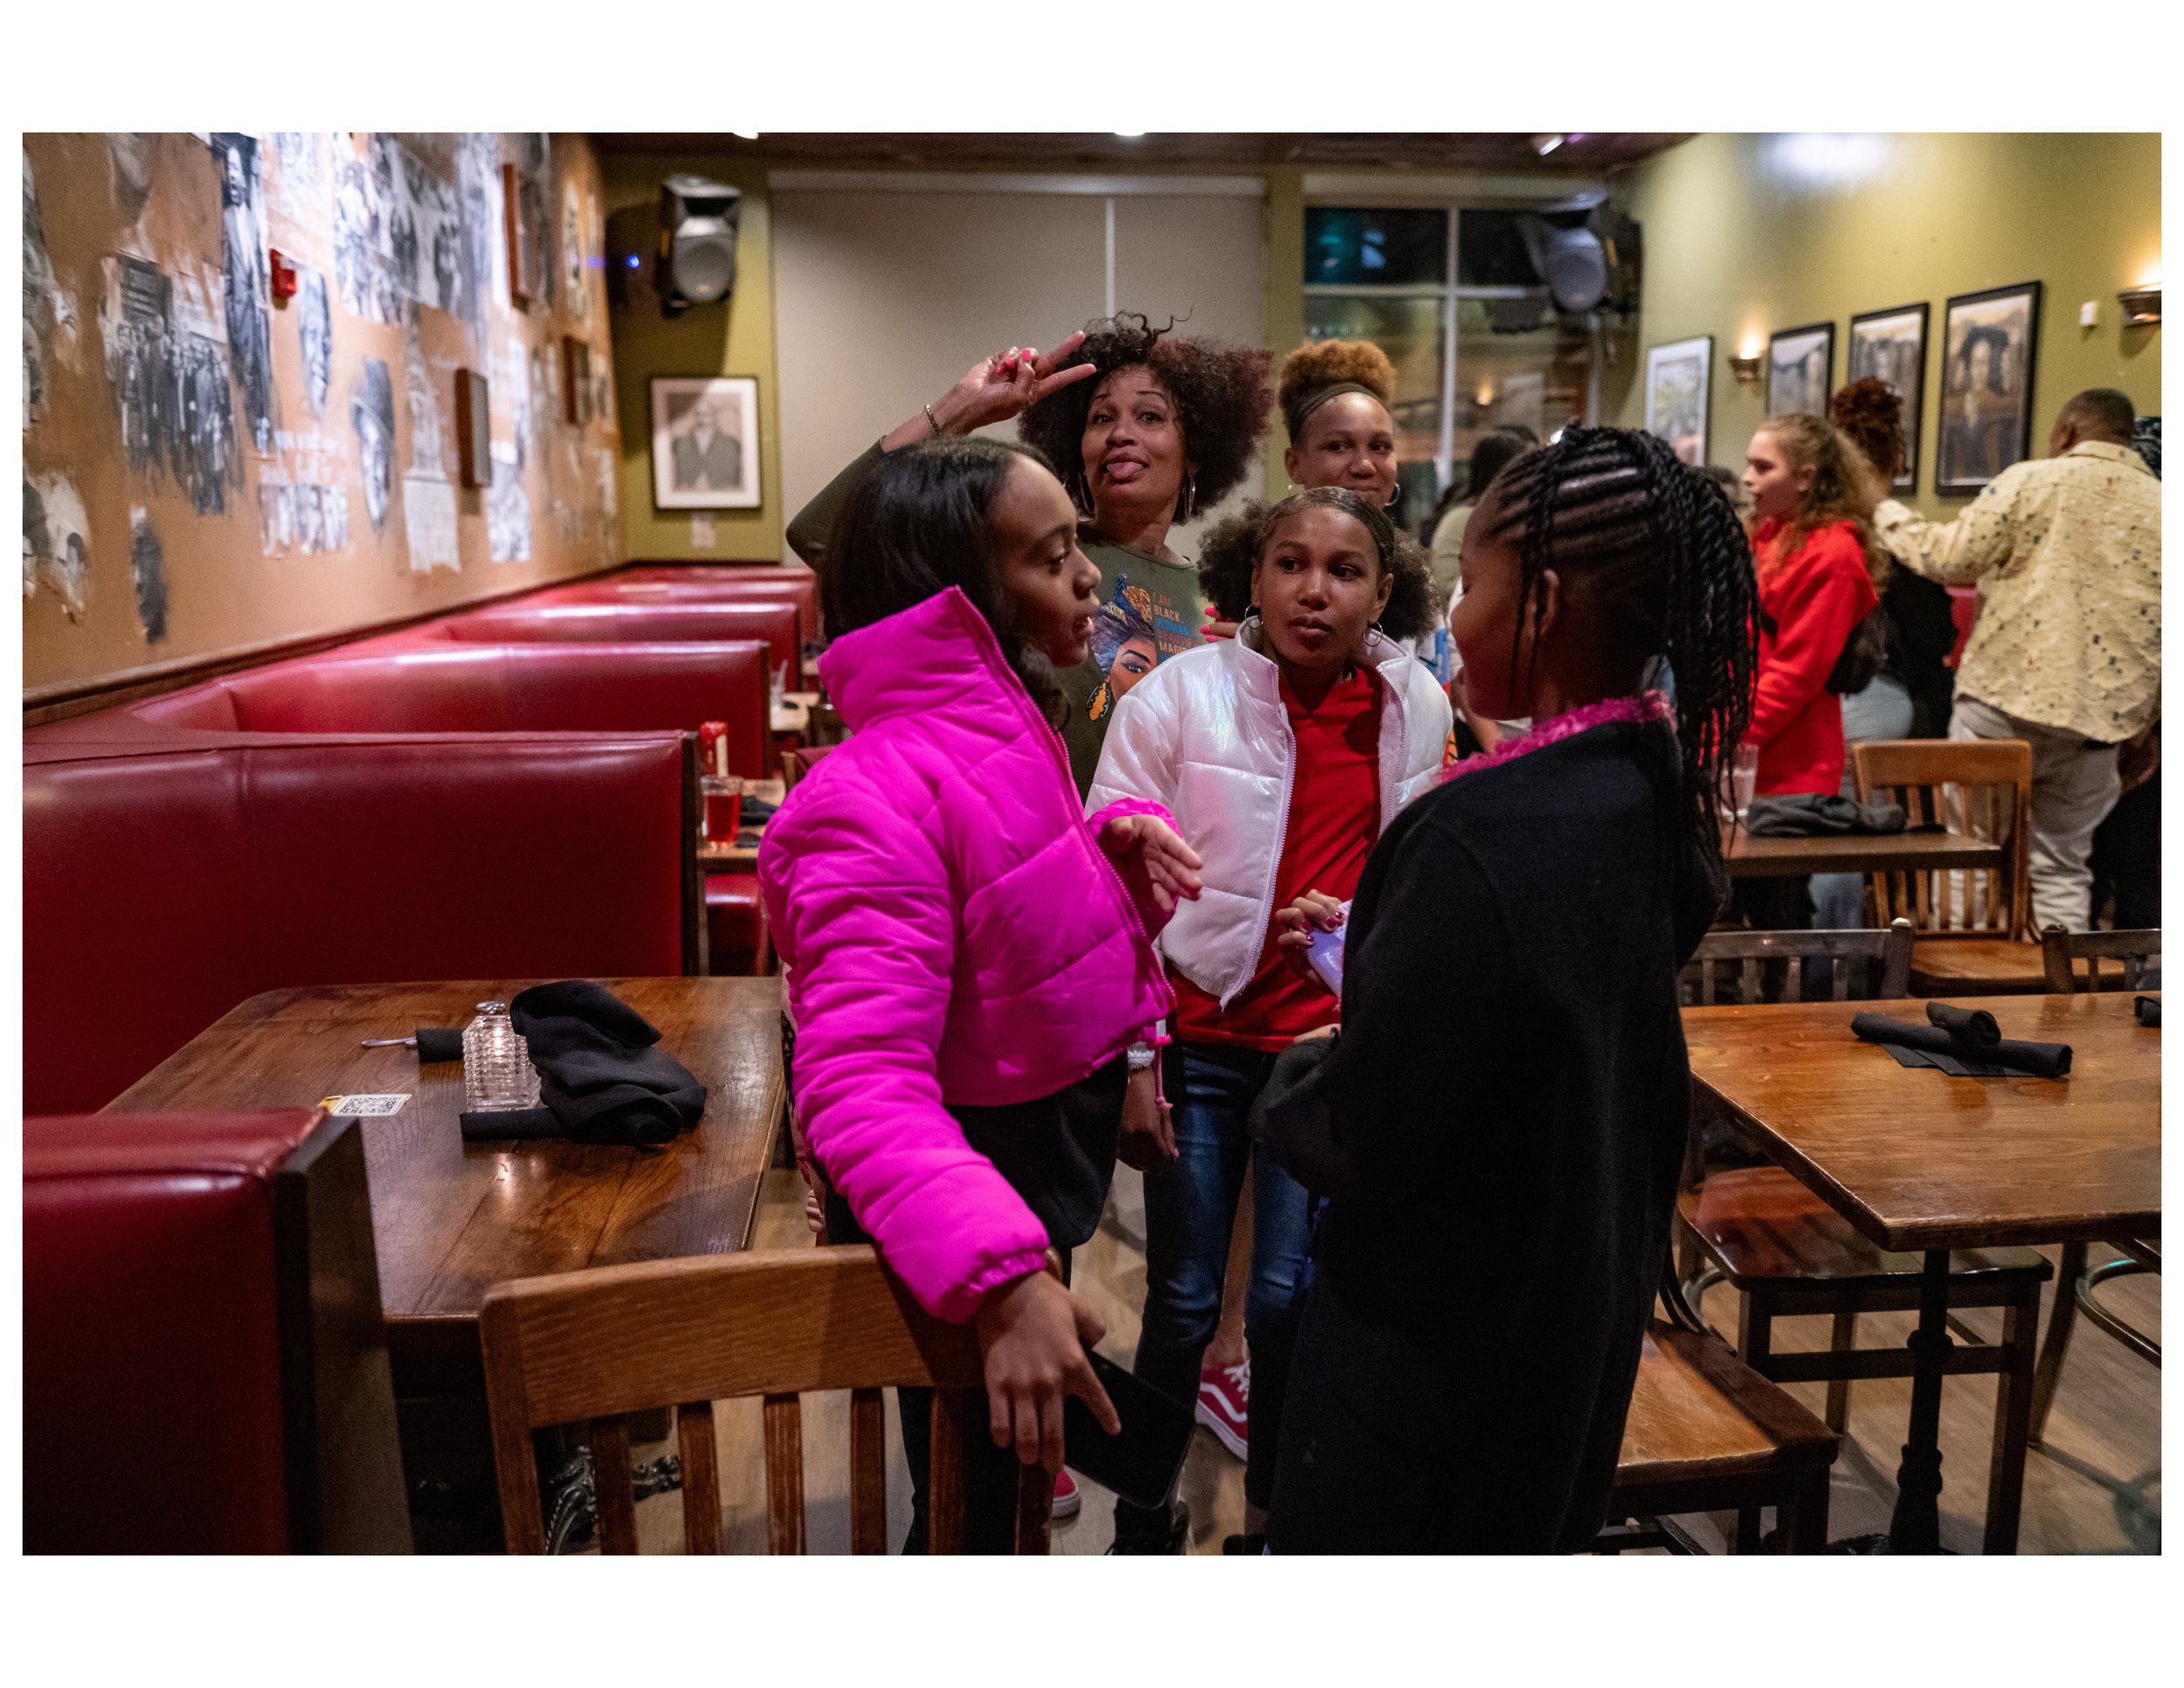   Family fun at an open mic event hosted by Words Beats &amp; Life Inc. at Busboys and Poets in Washington, DC. Photographer/Victoria Ford  